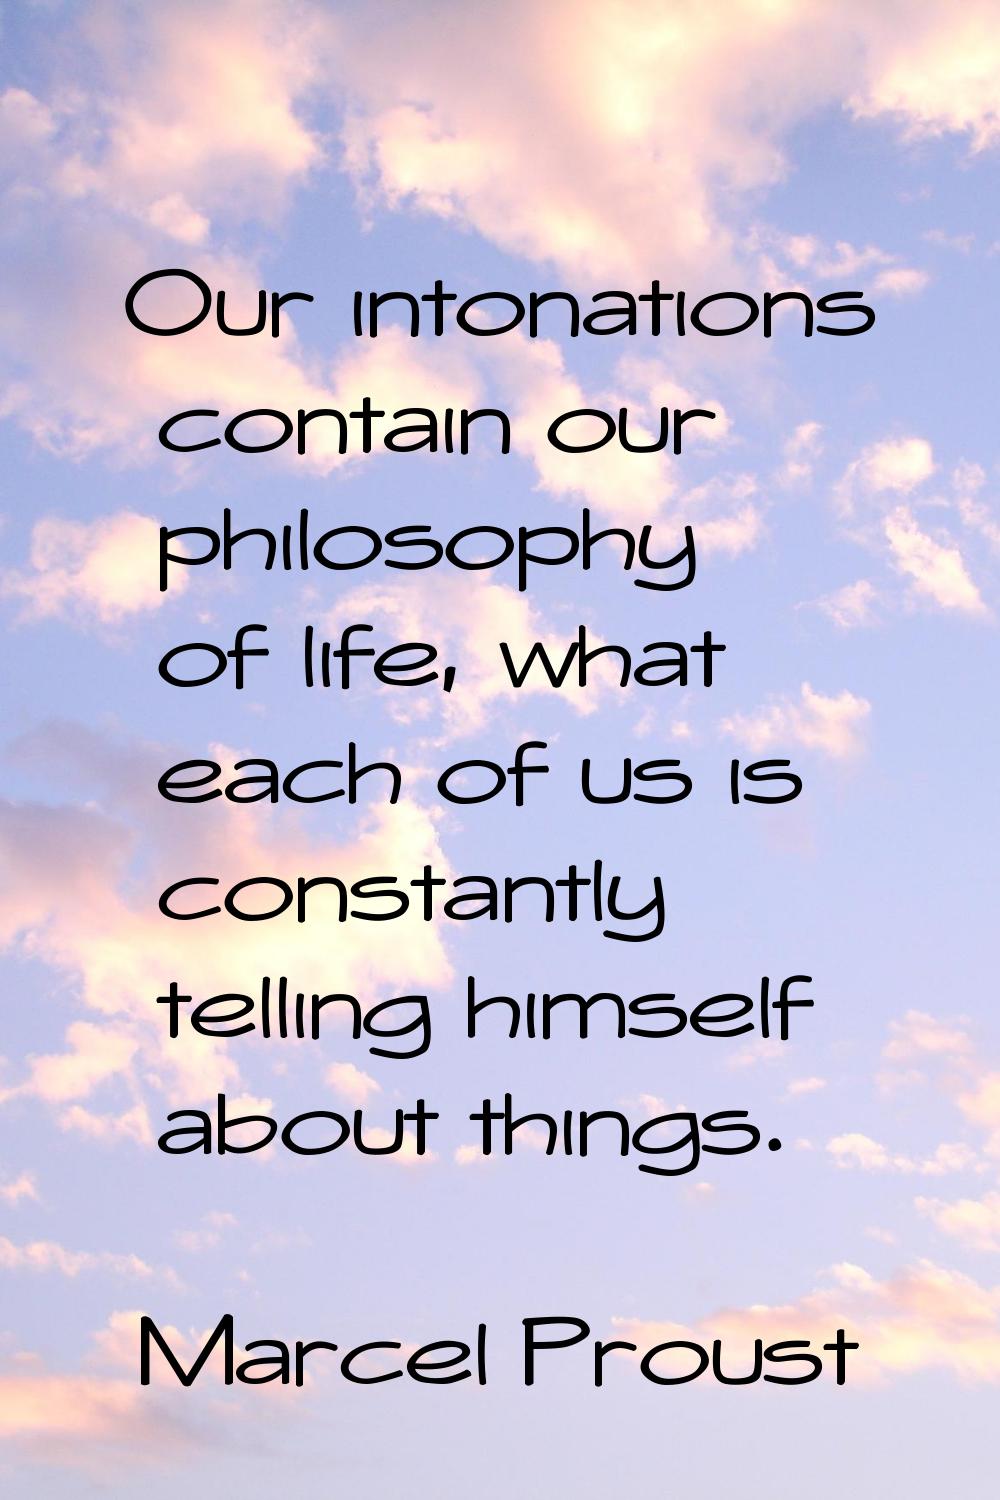 Our intonations contain our philosophy of life, what each of us is constantly telling himself about